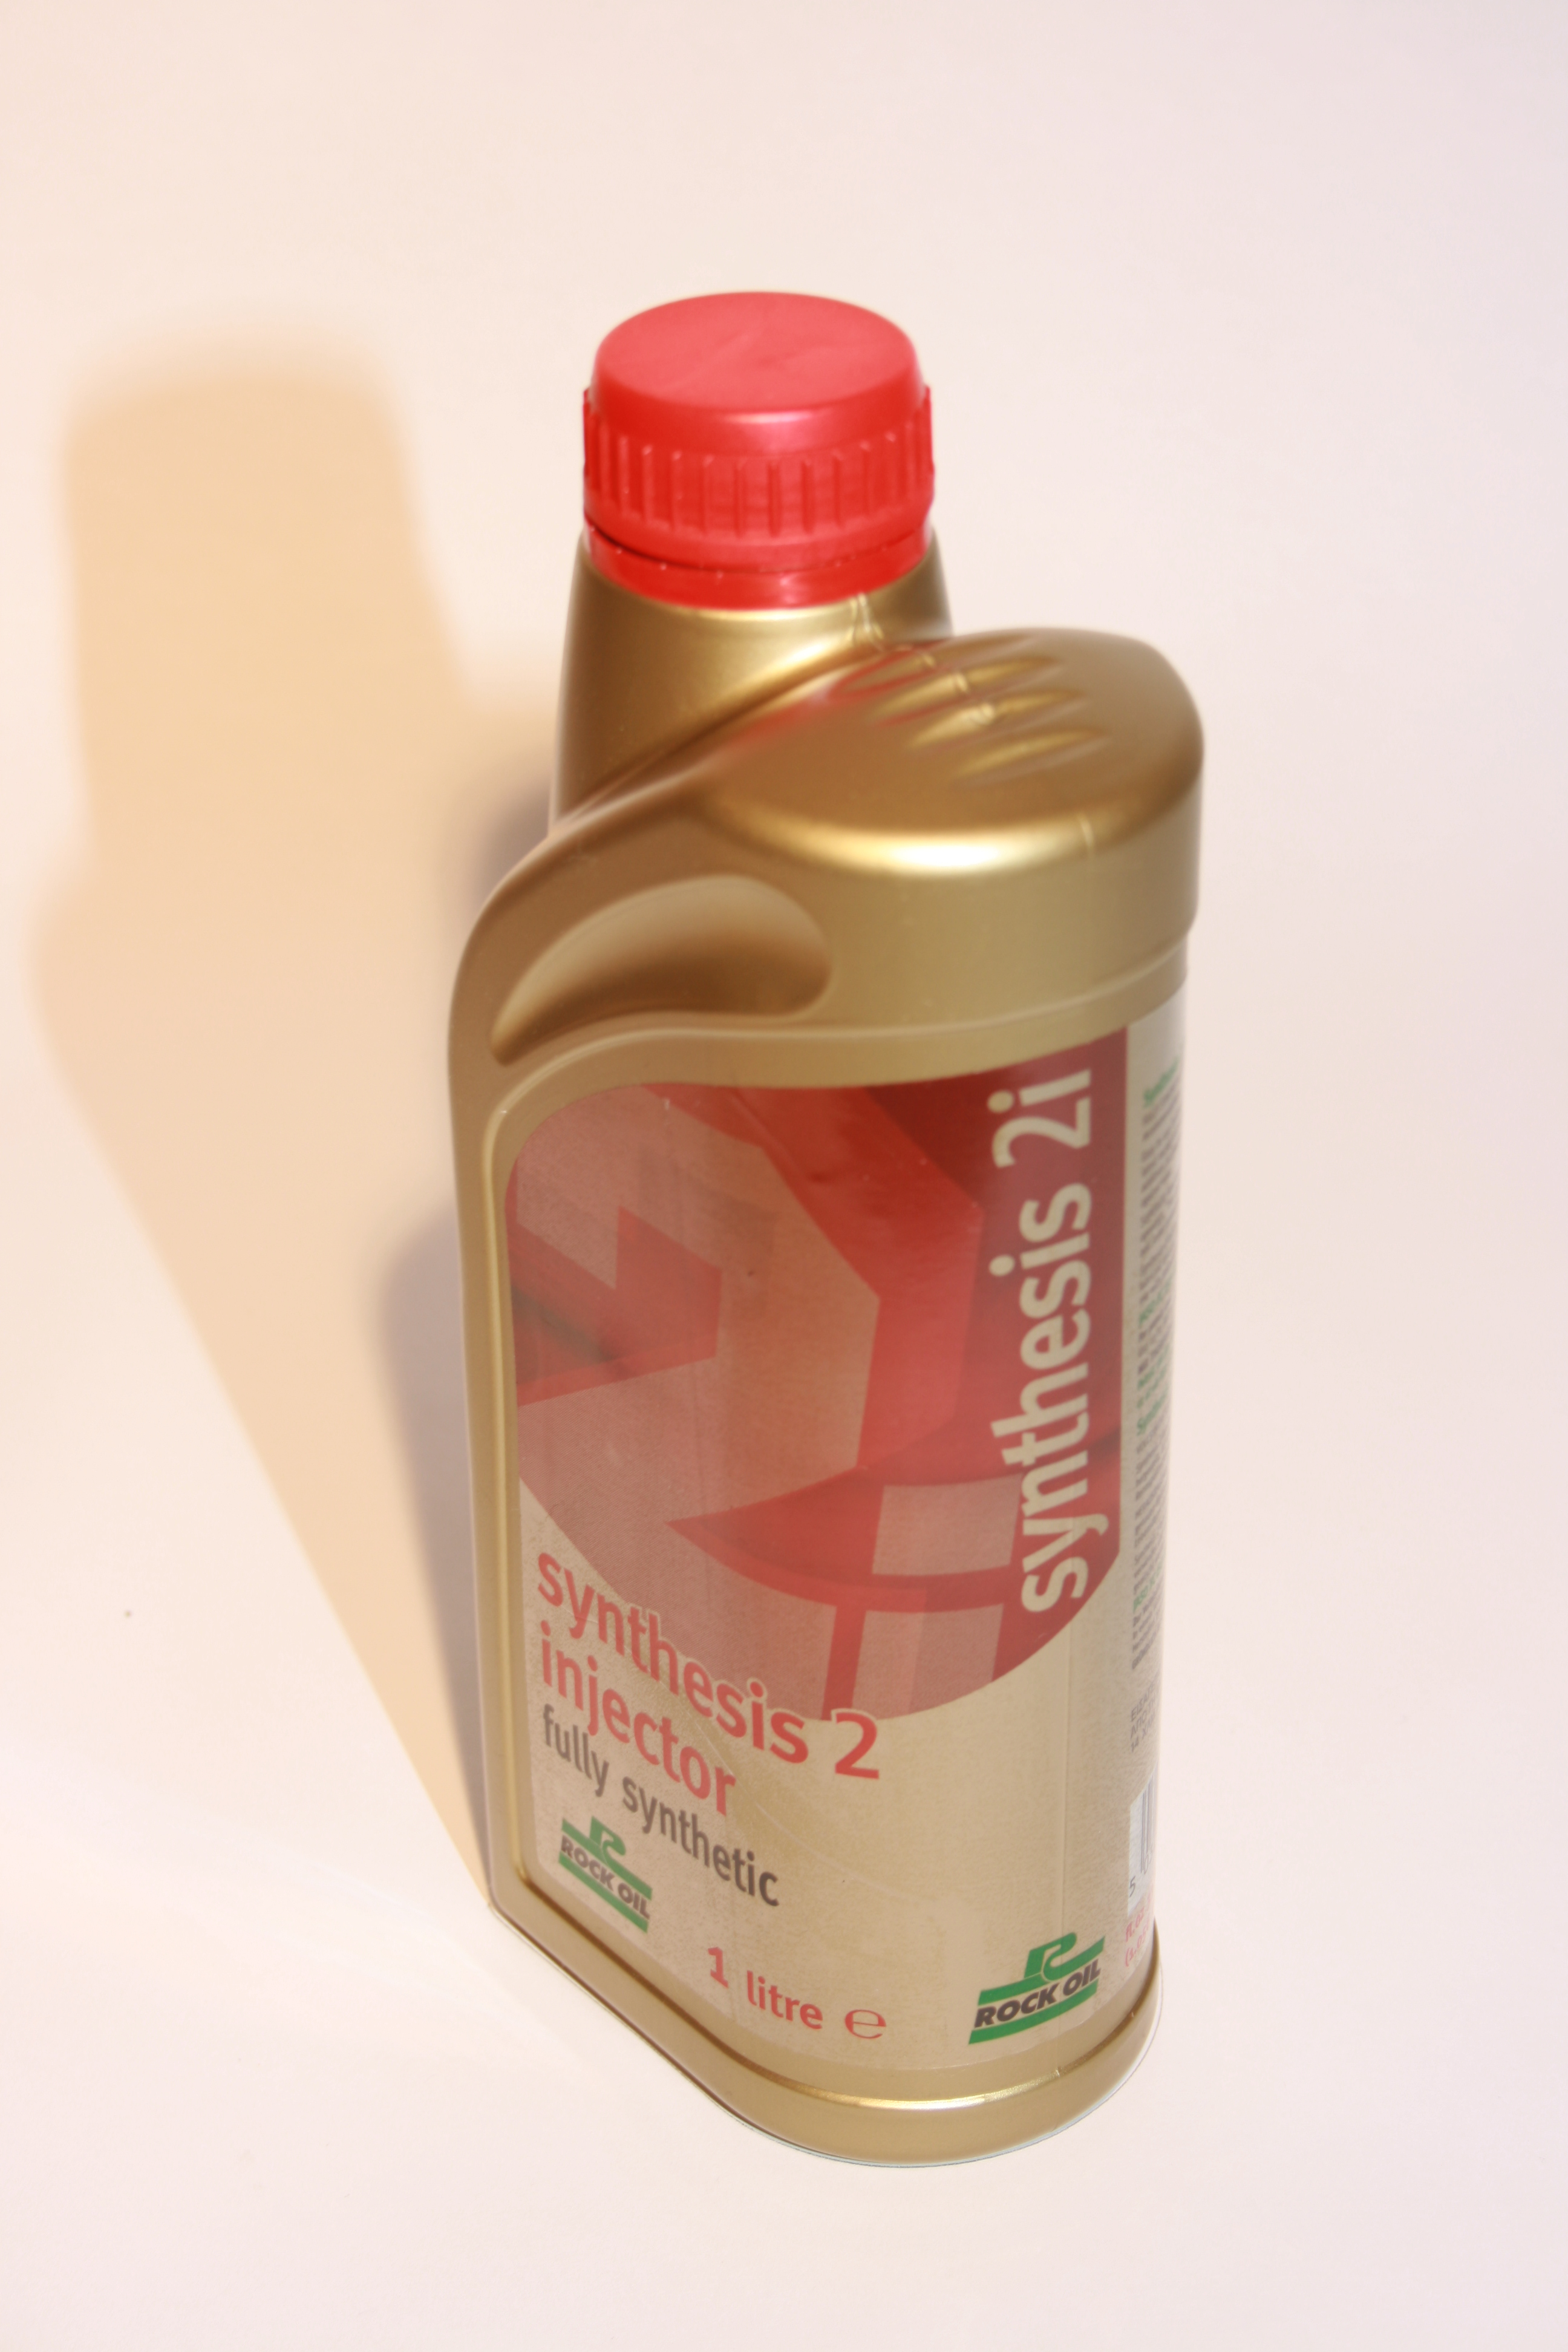 SYNTHESIS 2 INJECTOR 1 LTR